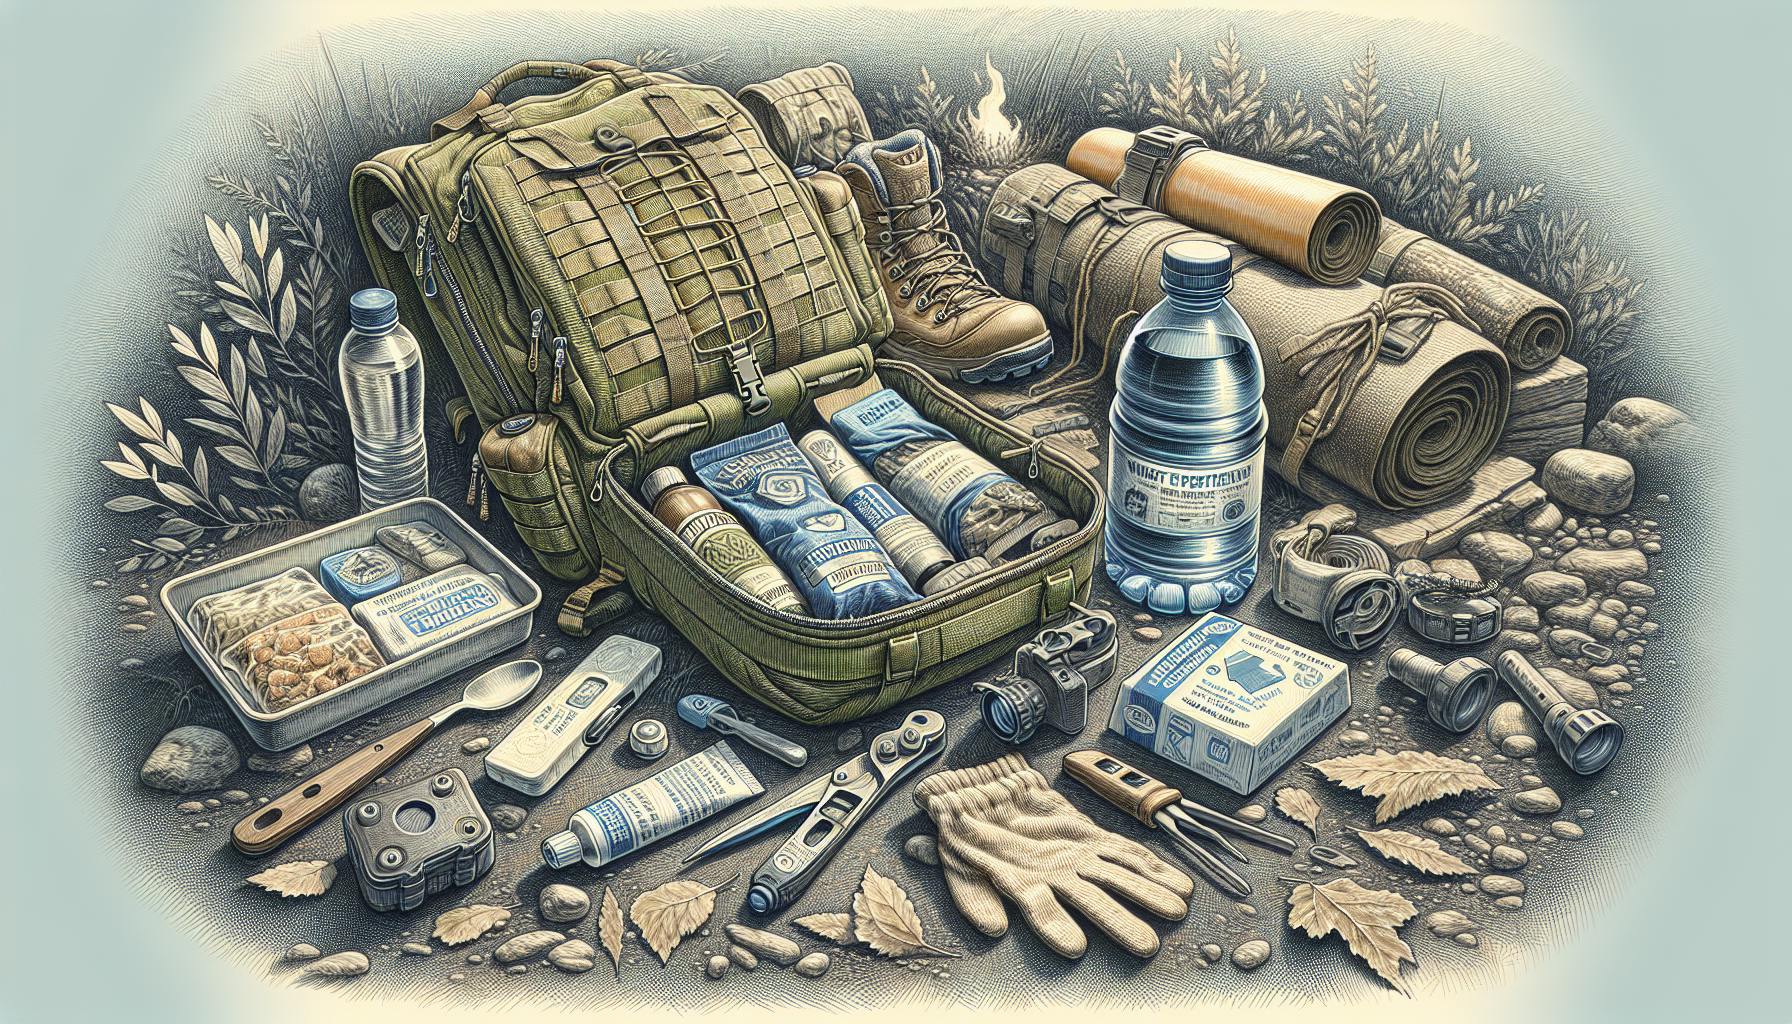 Survival Backpack Kit List: Must-Haves for the Prepared